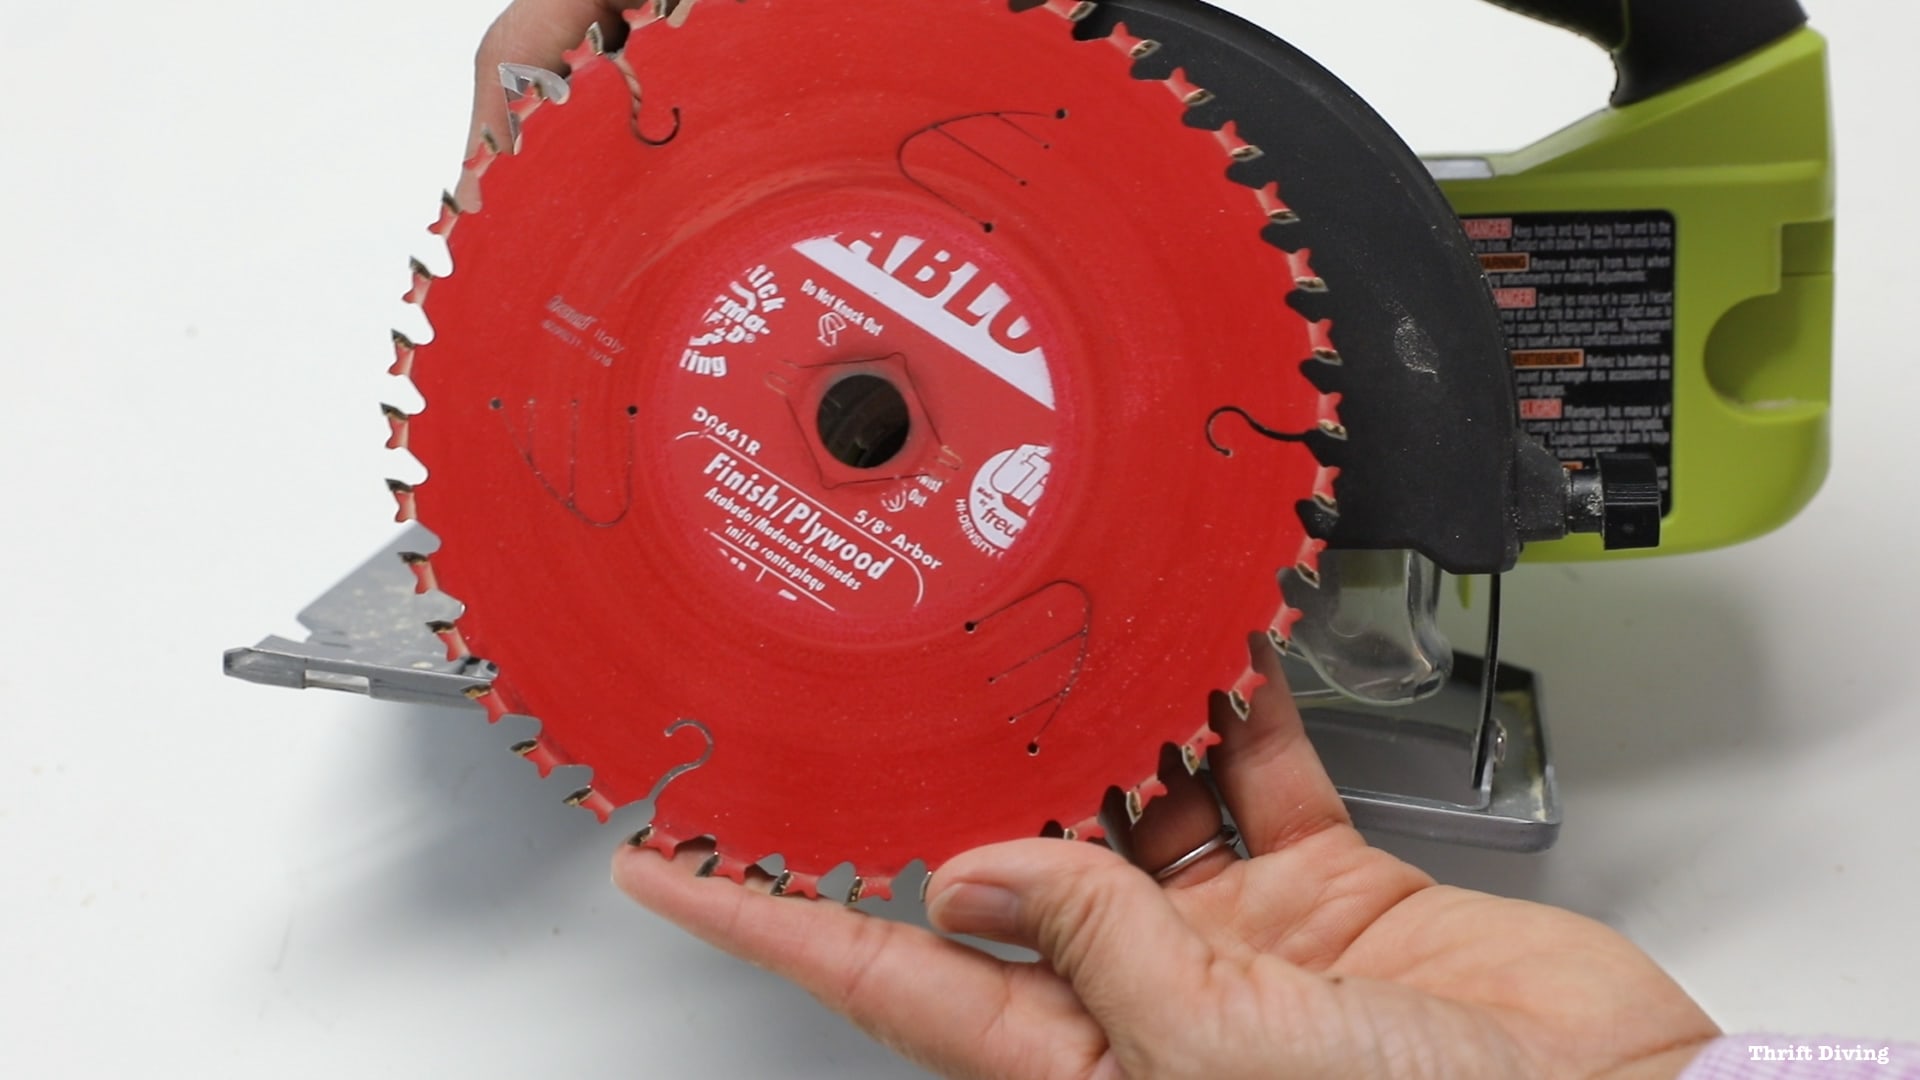 How to Use a Circular Saw - All about circular saw blades. - Thrift Diving